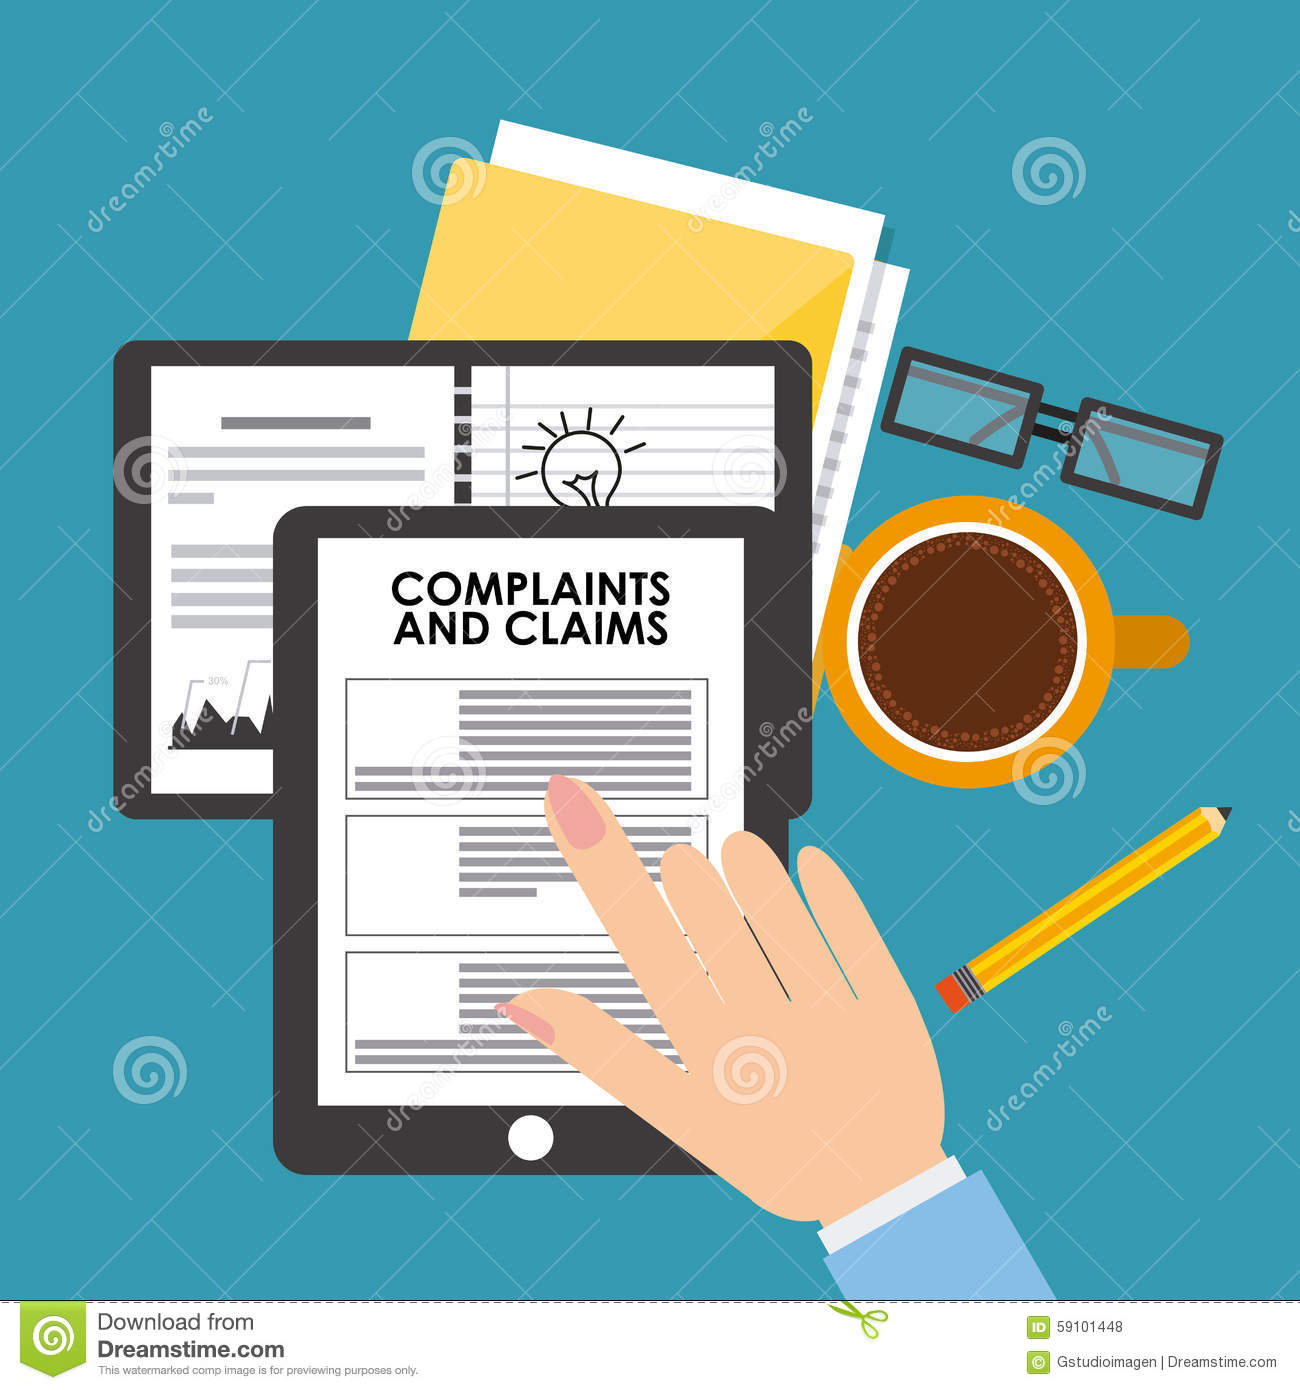 Complaints And Claims Design Vector Illustration Eps10 Graphic